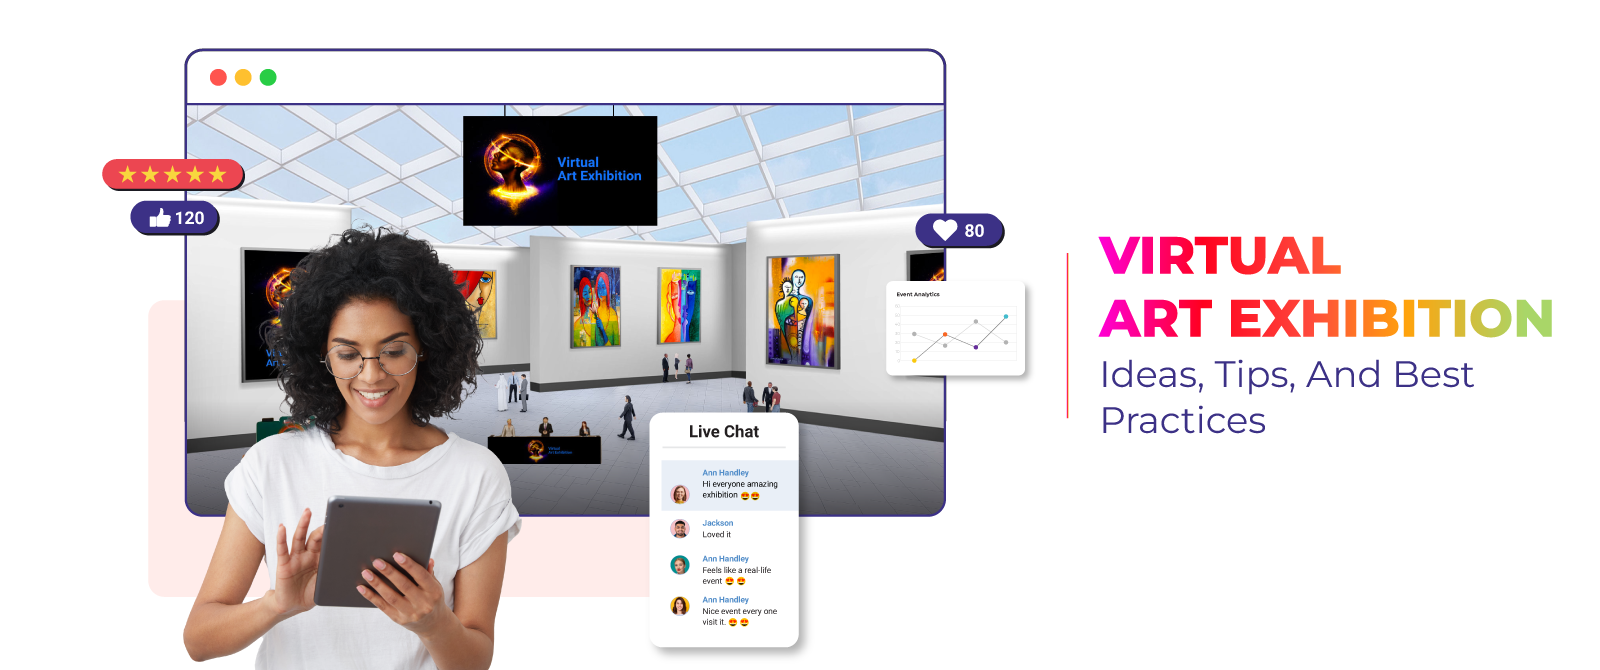 Virtual Art Exhibition: Ideas, Tips, and Best Practices